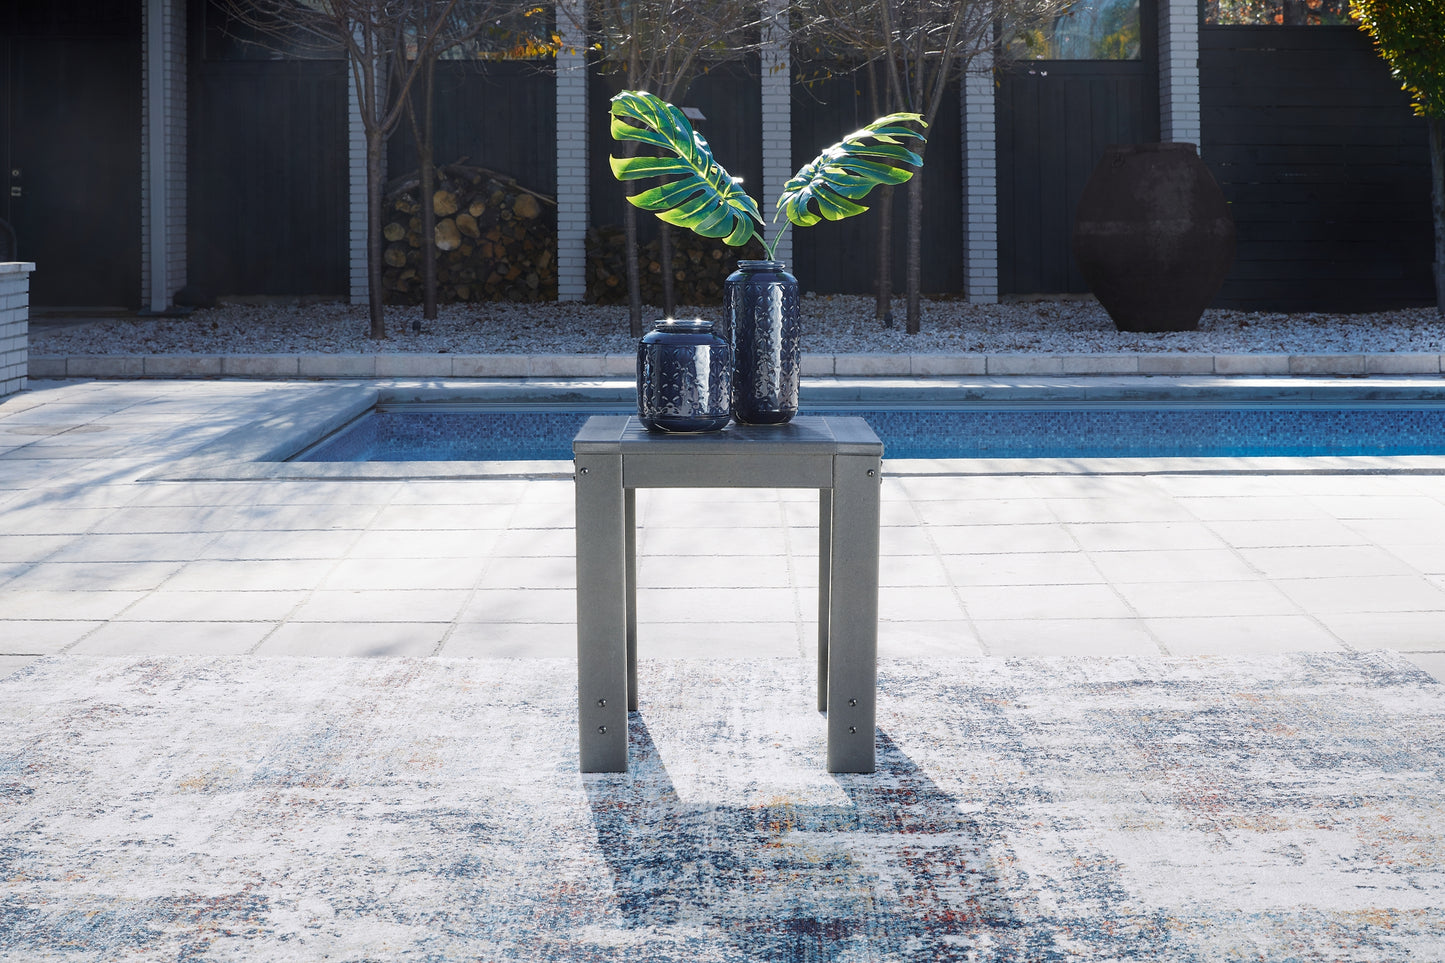 Amora Outdoor Coffee Table with 2 End Tables